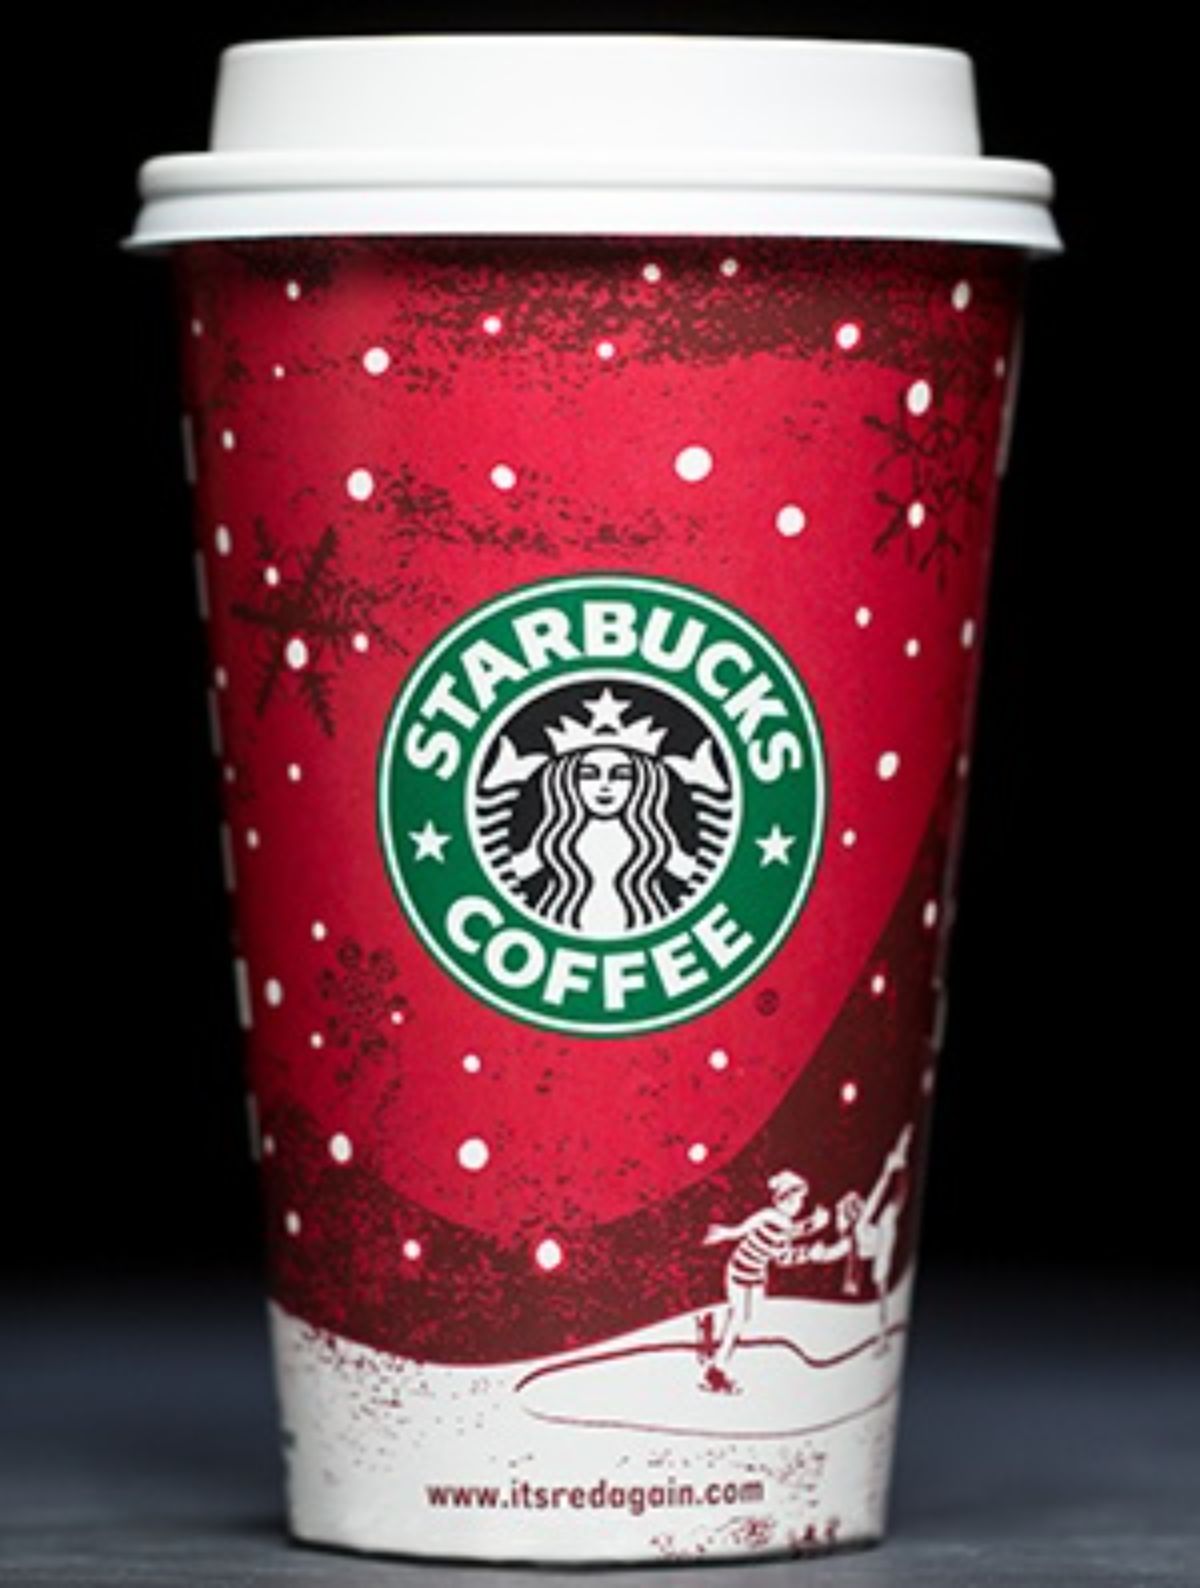 2007 Starbucks Holiday Cup in red with ice skating scene